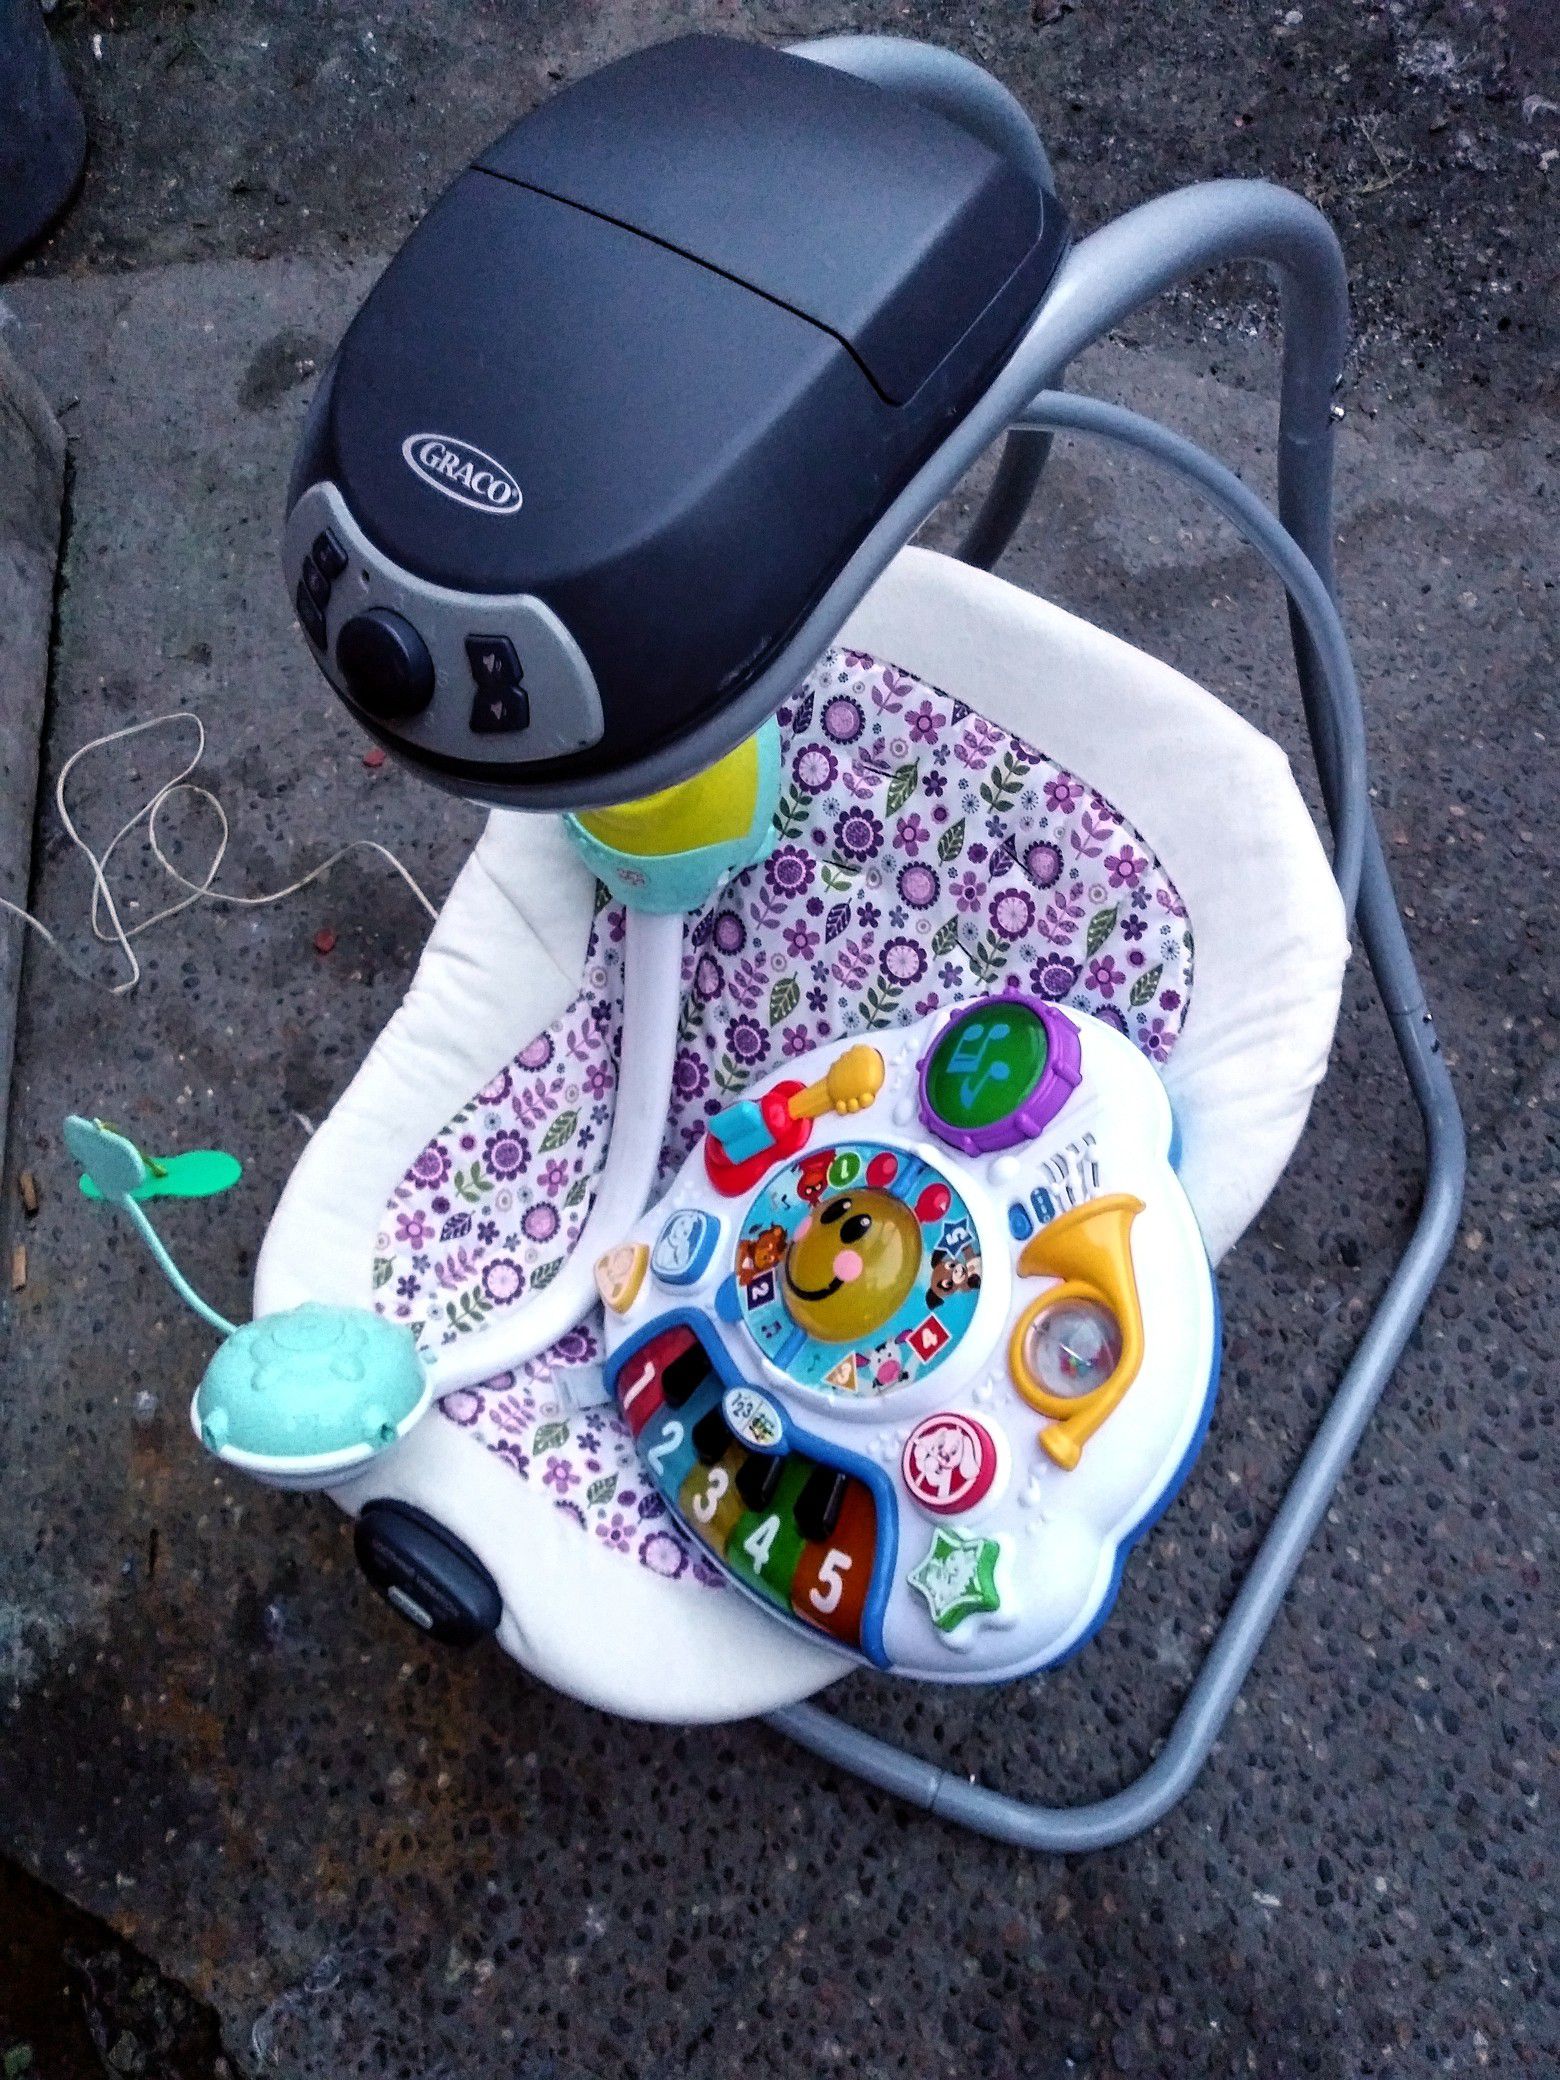 Baby swing, toy and crib music device